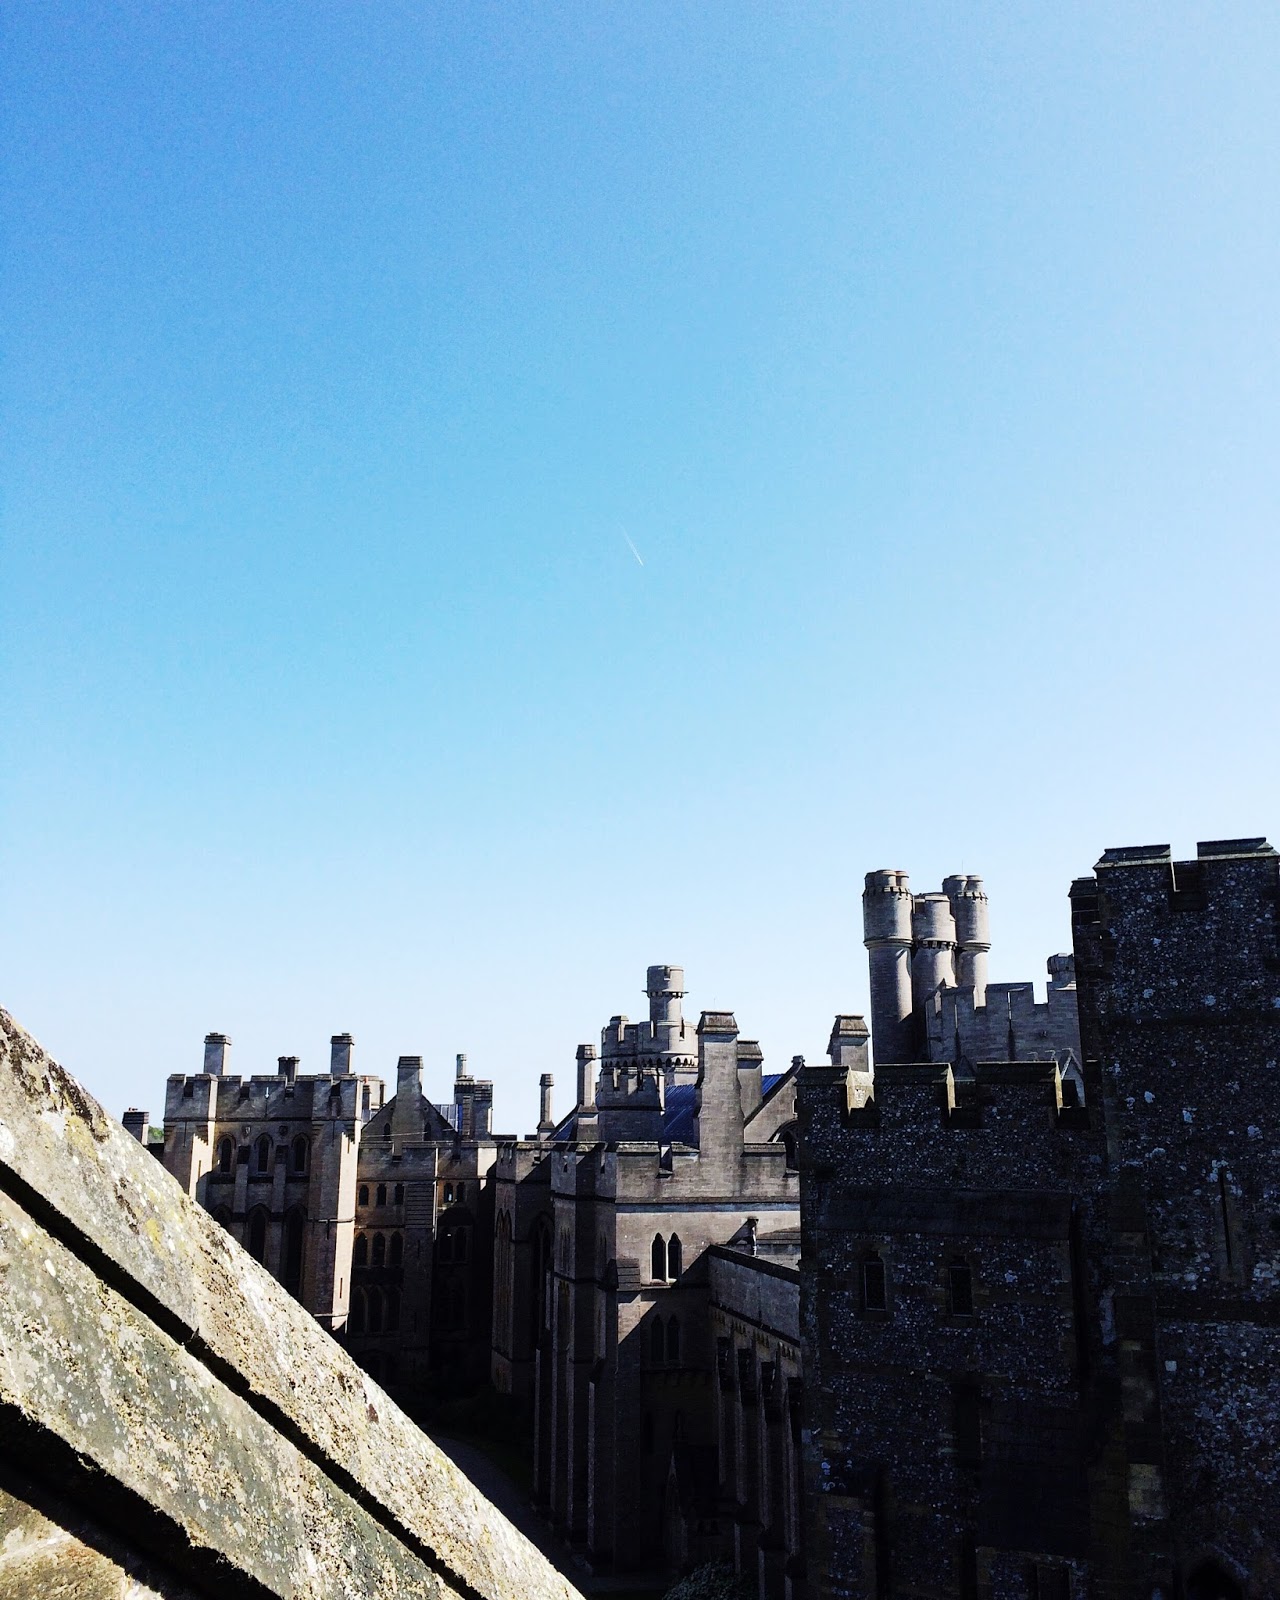 Arundel Castle, things to do in West Sussex, UK lifestyle blog, Dalry Rose